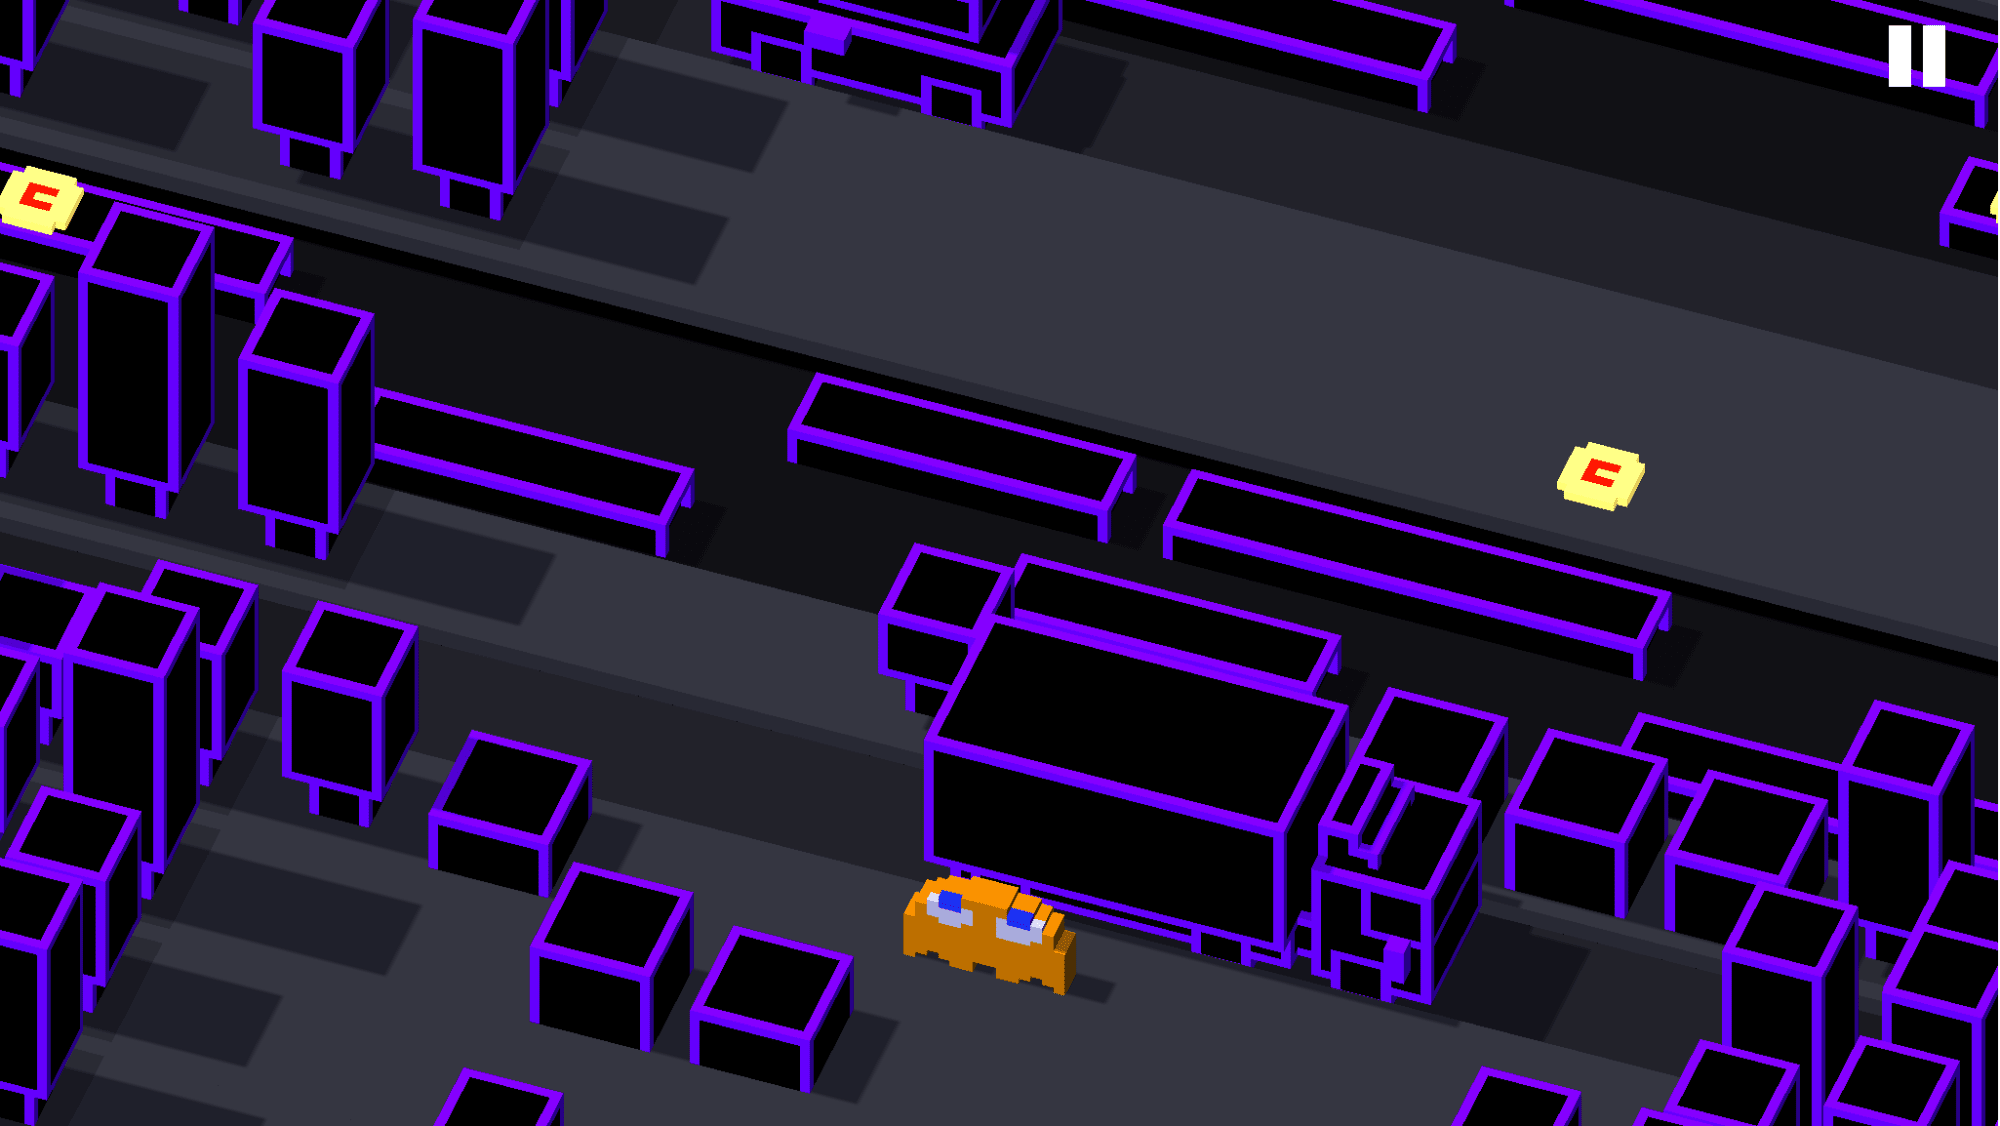 hiw to unlick the pac man ghists in crossy road